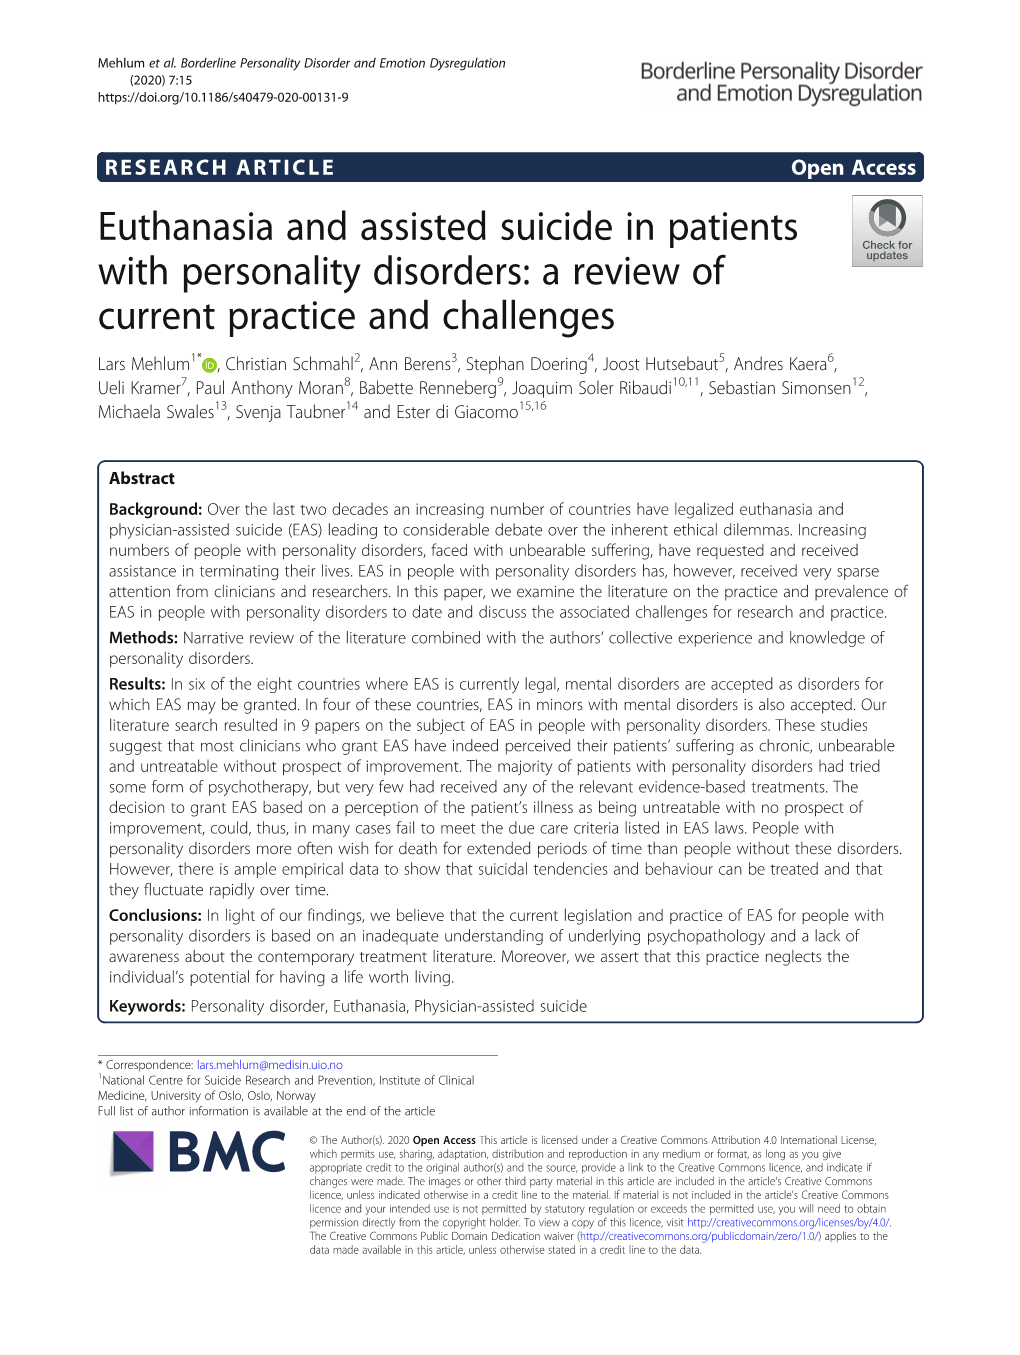 Euthanasia and Assisted Suicide in Patients with Personality Disorders